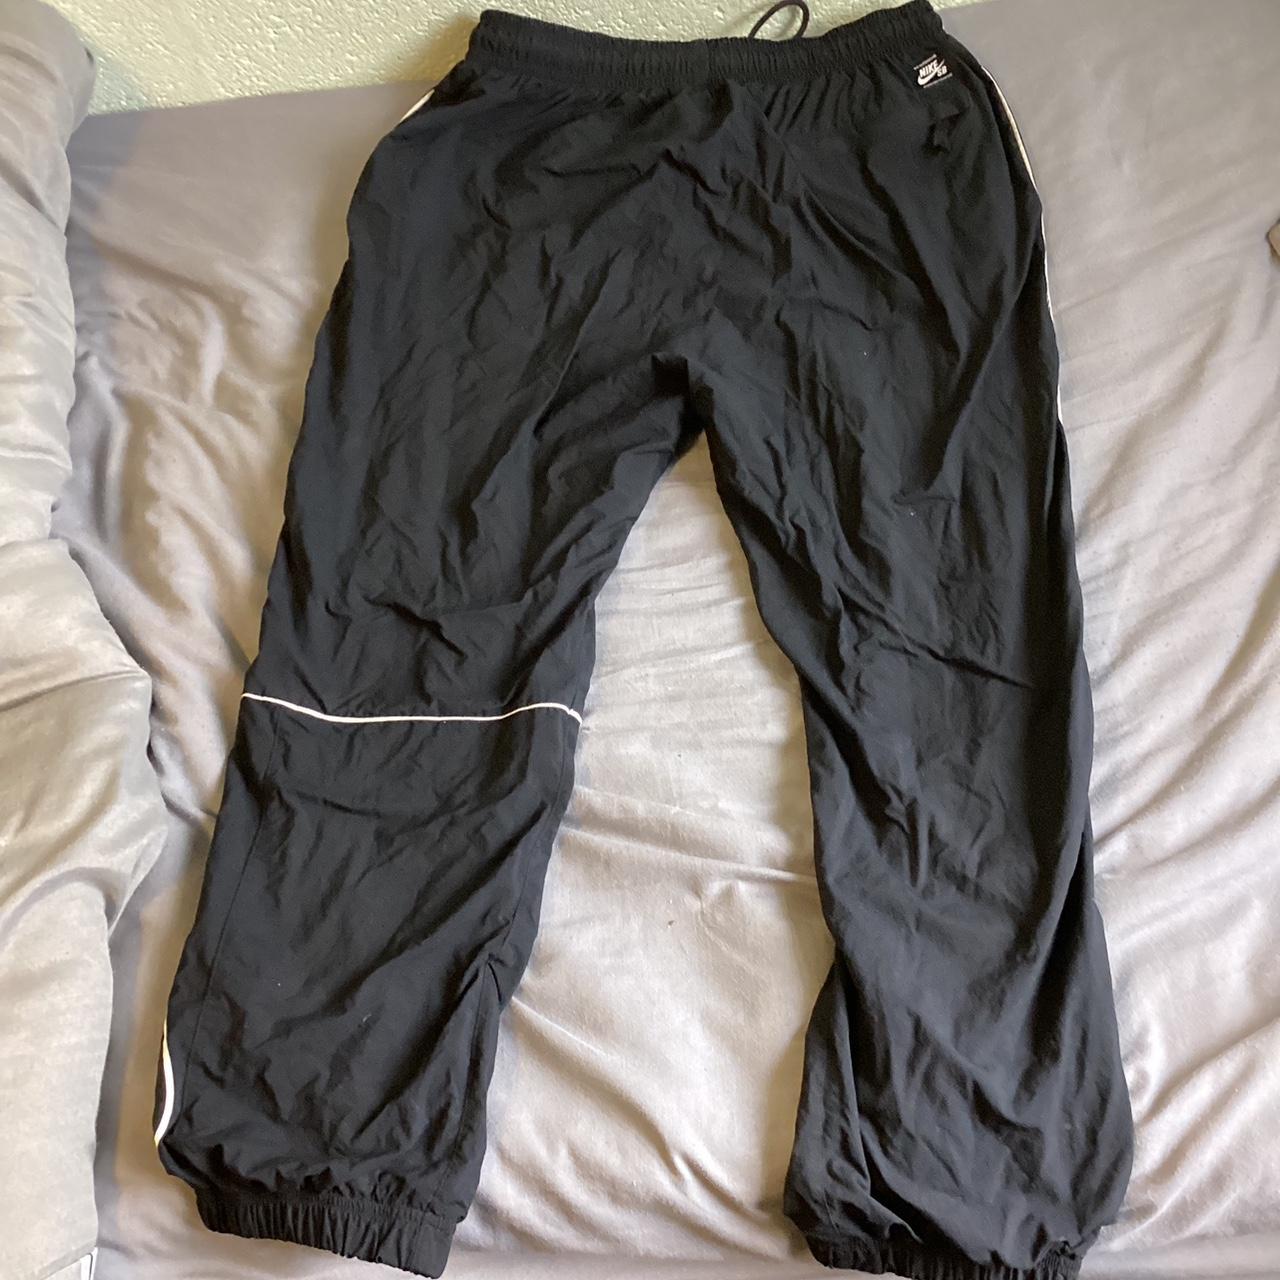 Nike sb track pant size small open to offers... - Depop